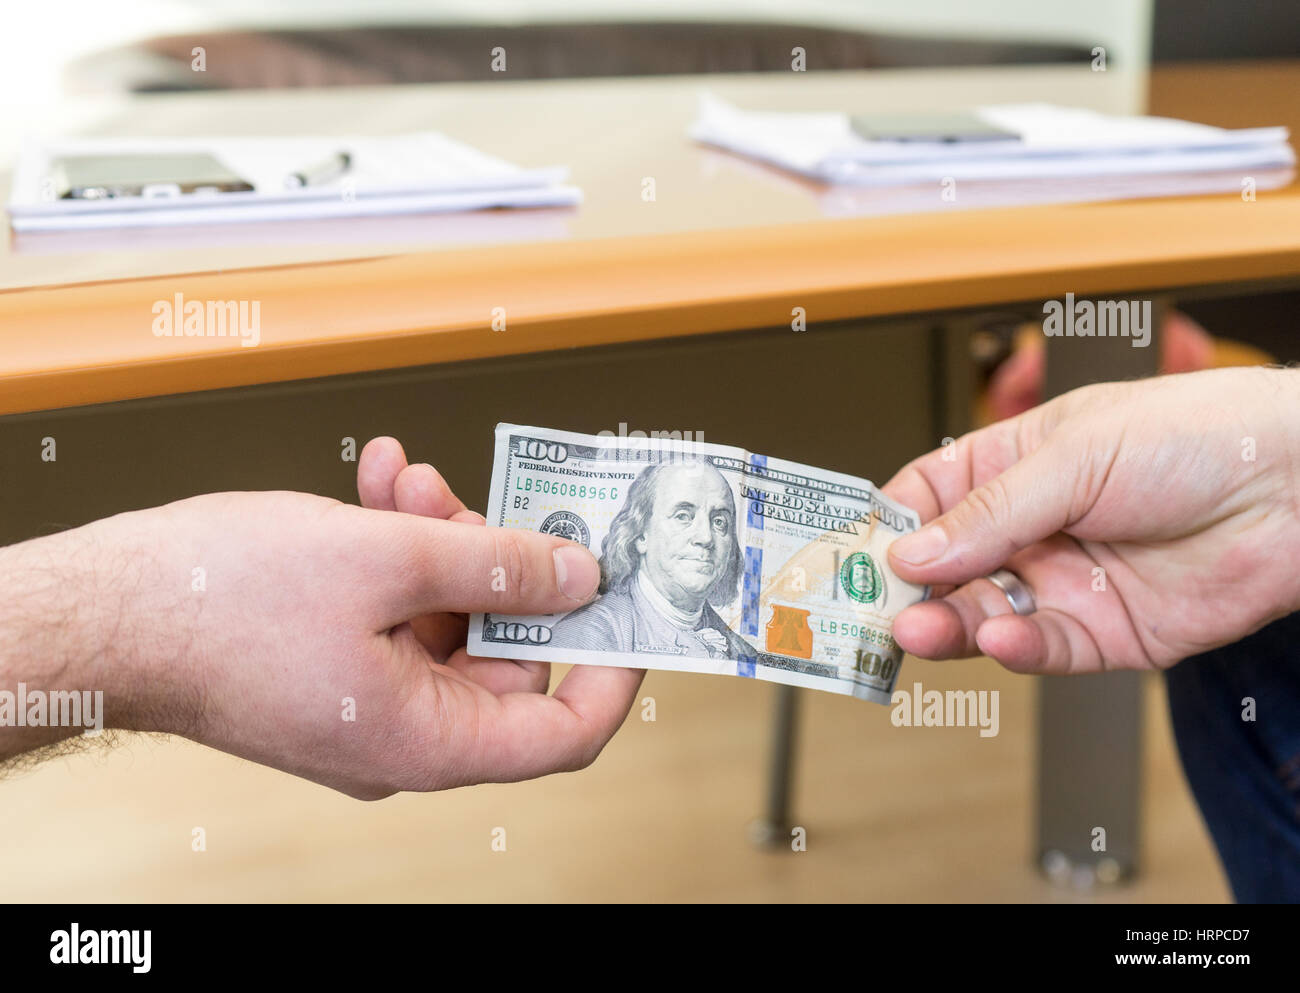 Man offering of hundred dollar bill. Hands close up. Corruption concept.  United States Dollars (or USD). Stock Photo